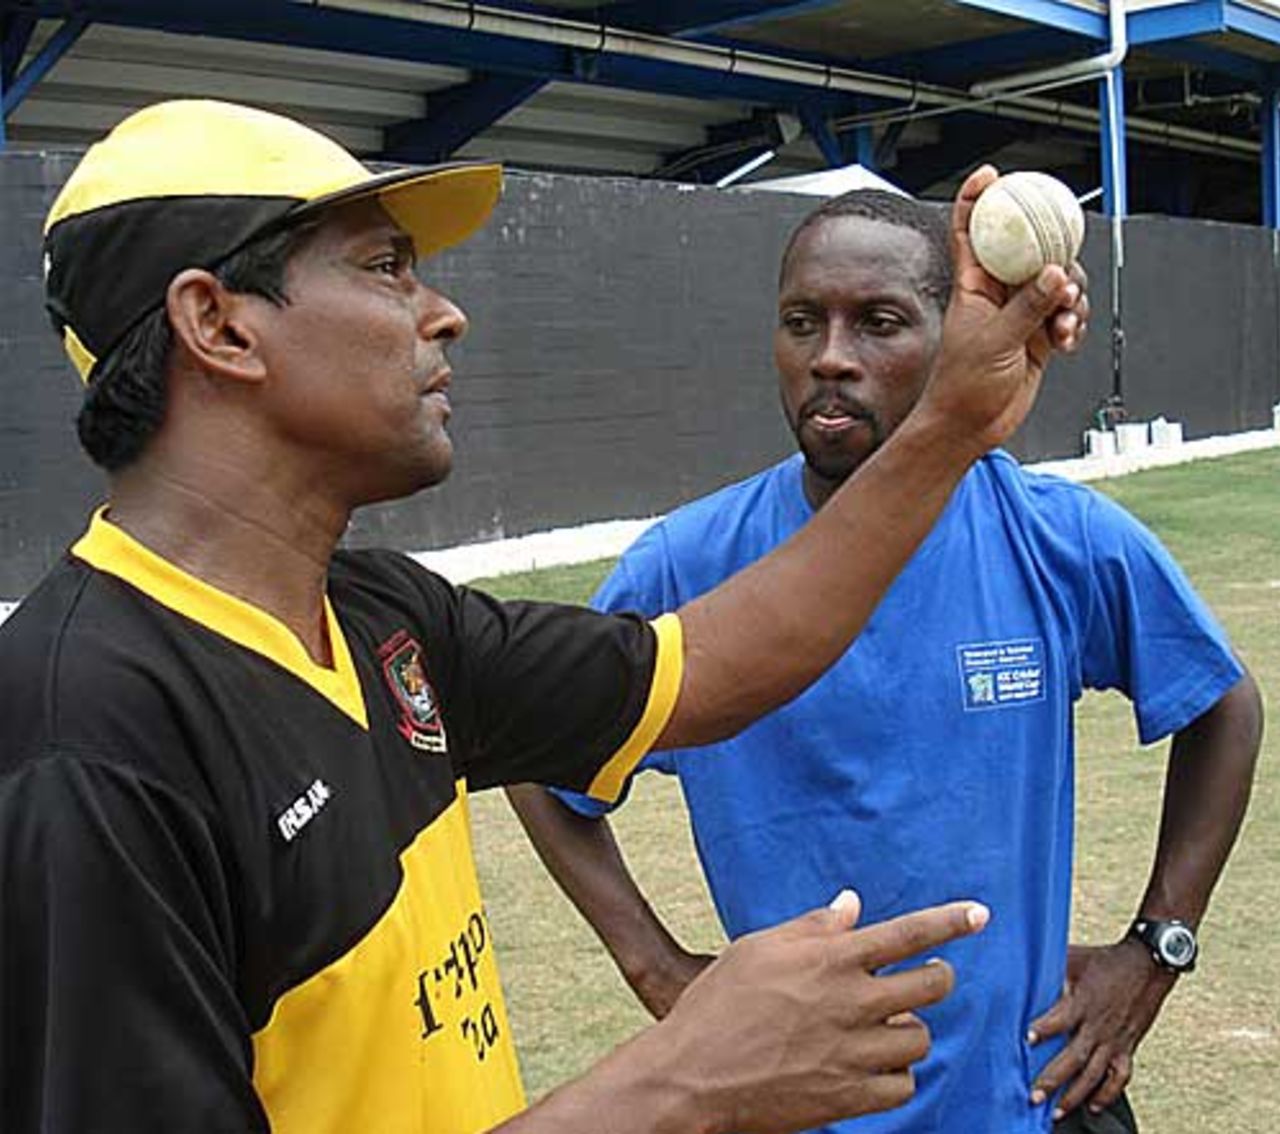 Mohammad Rafique shows a local left-arm spinner the tricks of an arm-ball, Trinidad, March 20, 2007